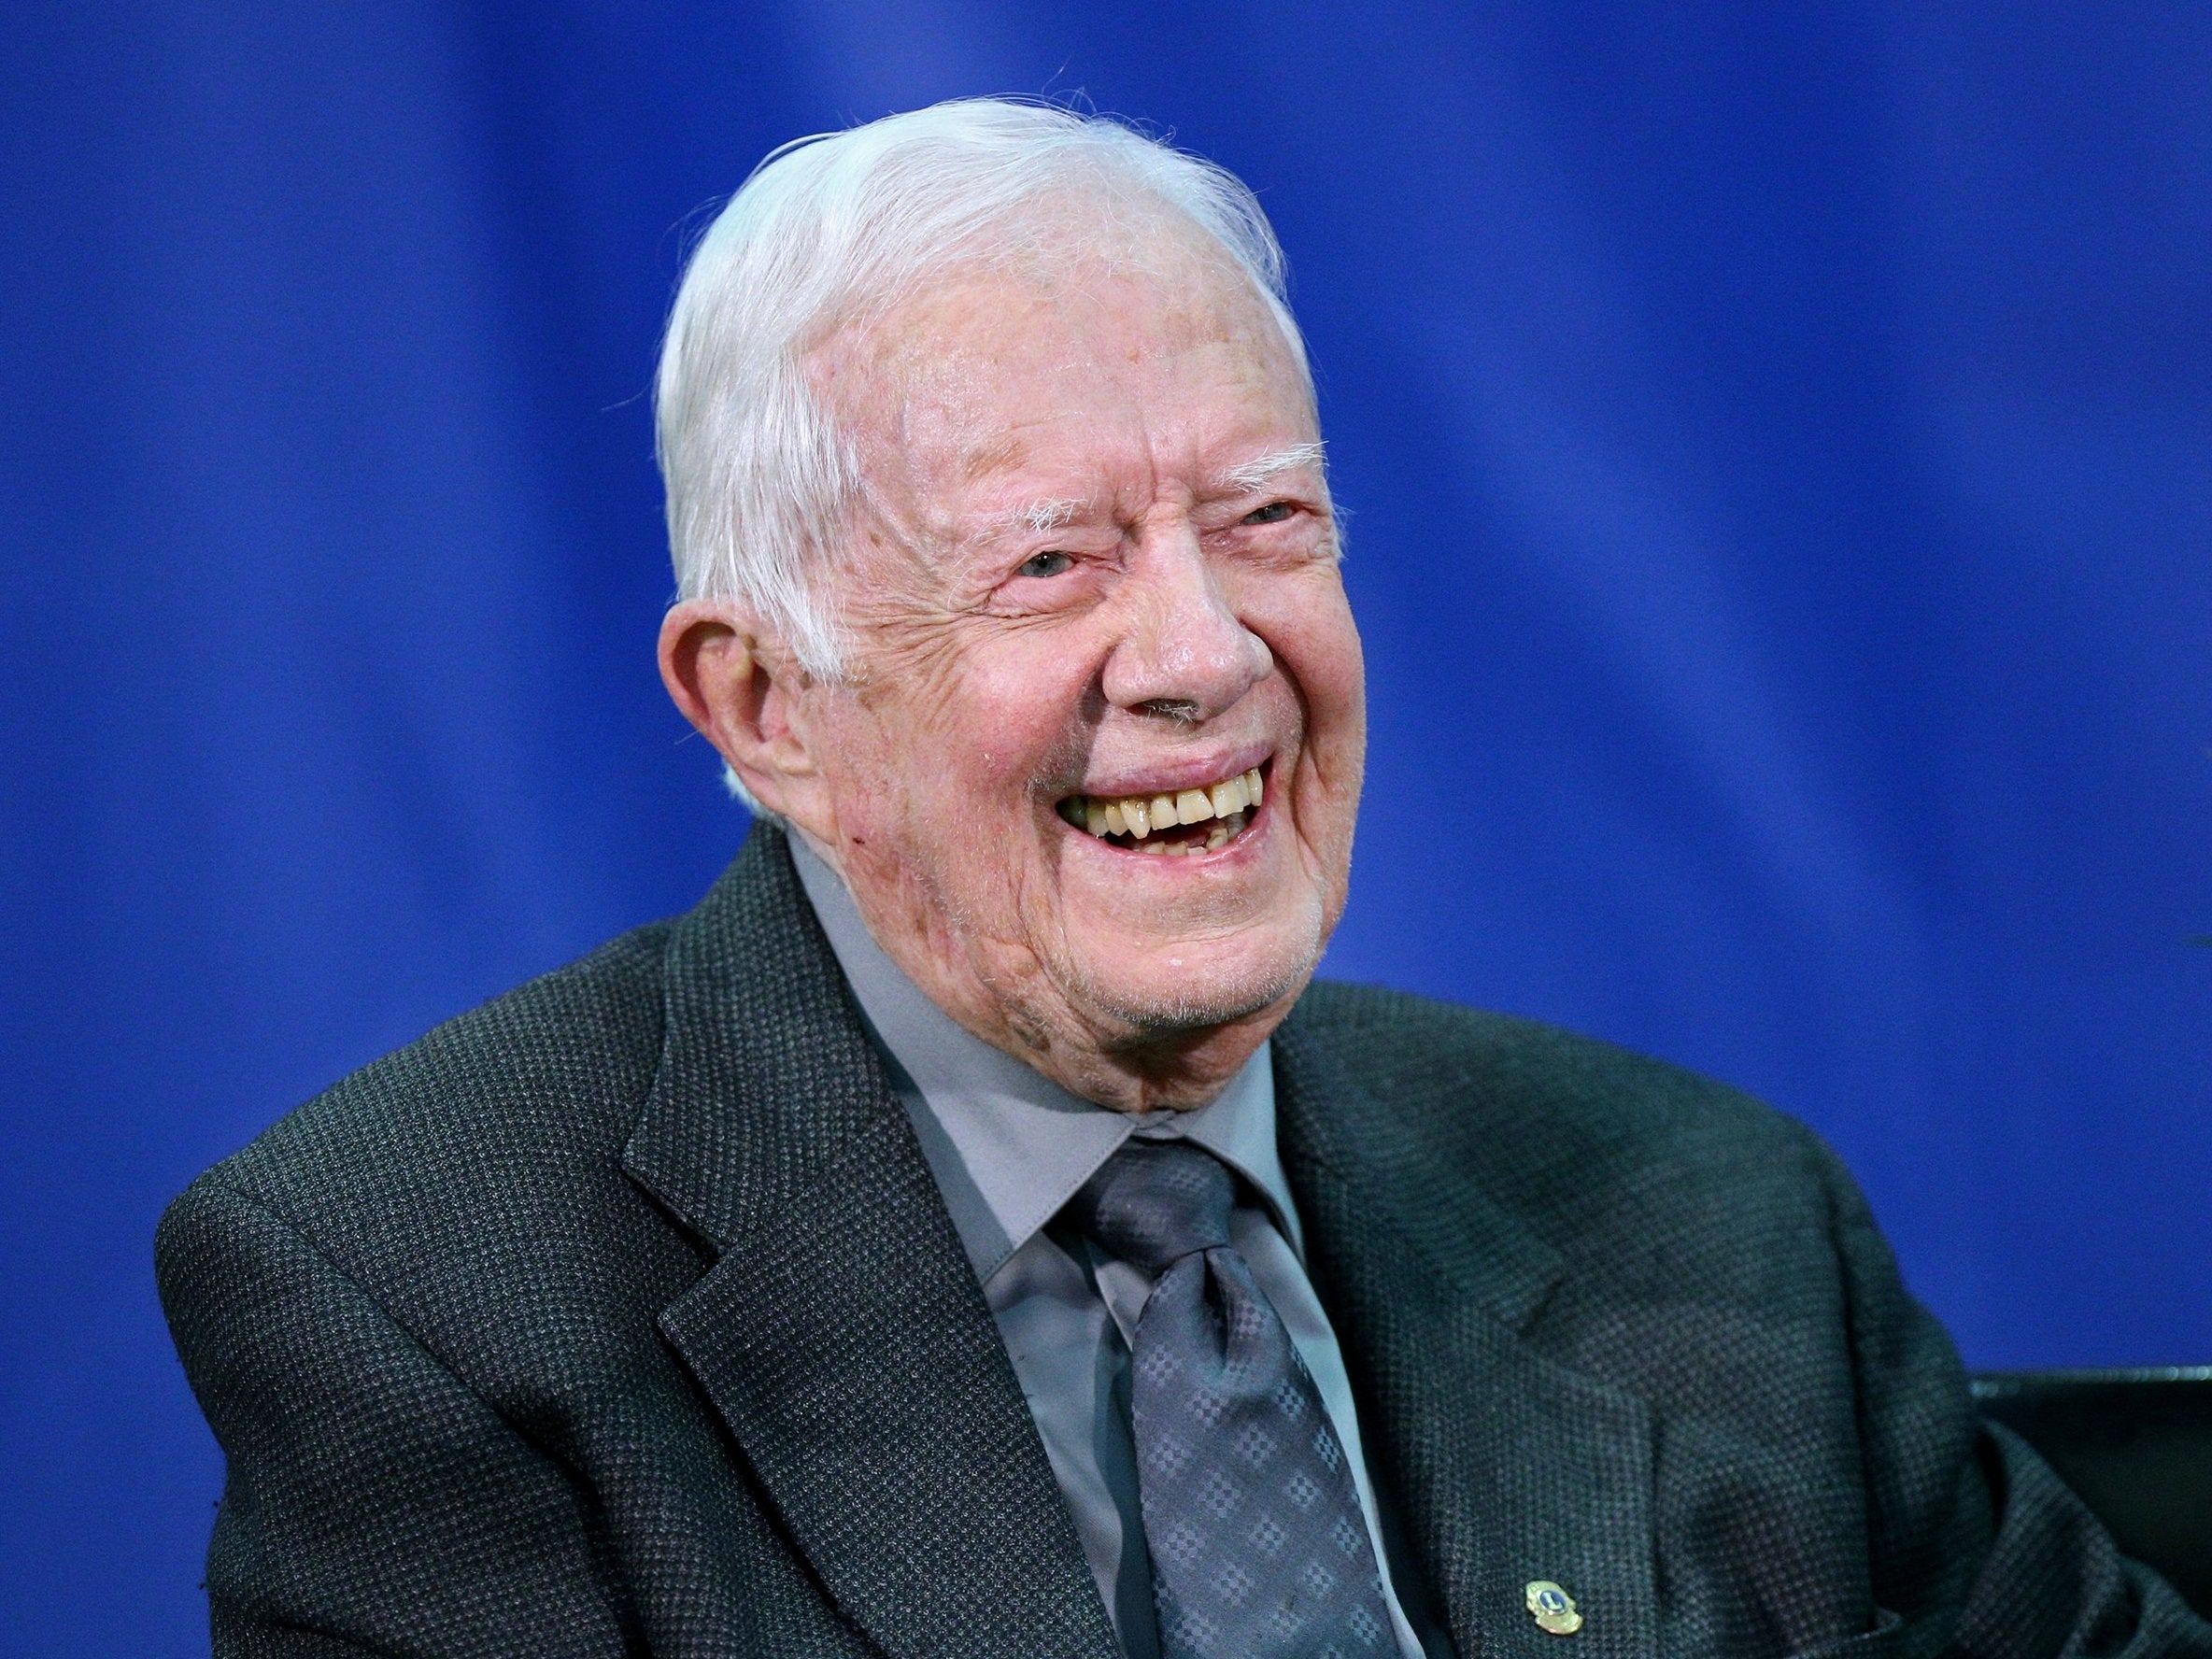 Former President Jimmy Carter questioned whether Donald Trump was a legitimate president during a panel on human rights in Virginia on Friday.